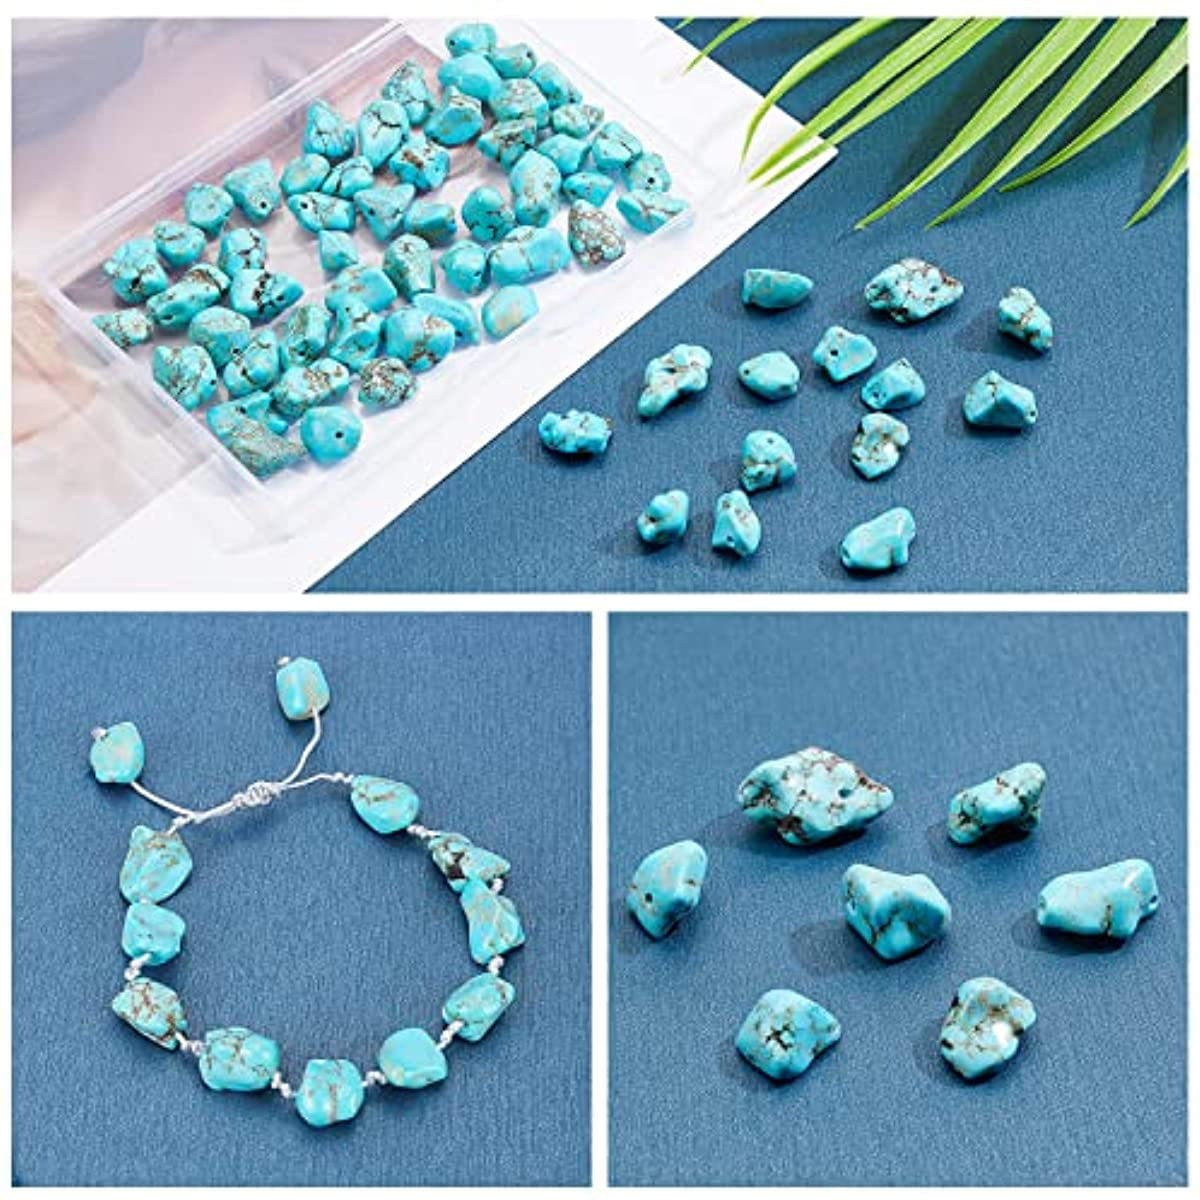 Crushed Beads, Comfortable Touch Multipurpose Natural Chip Stone Beads For  Bracelets For Fish Tank Decor 